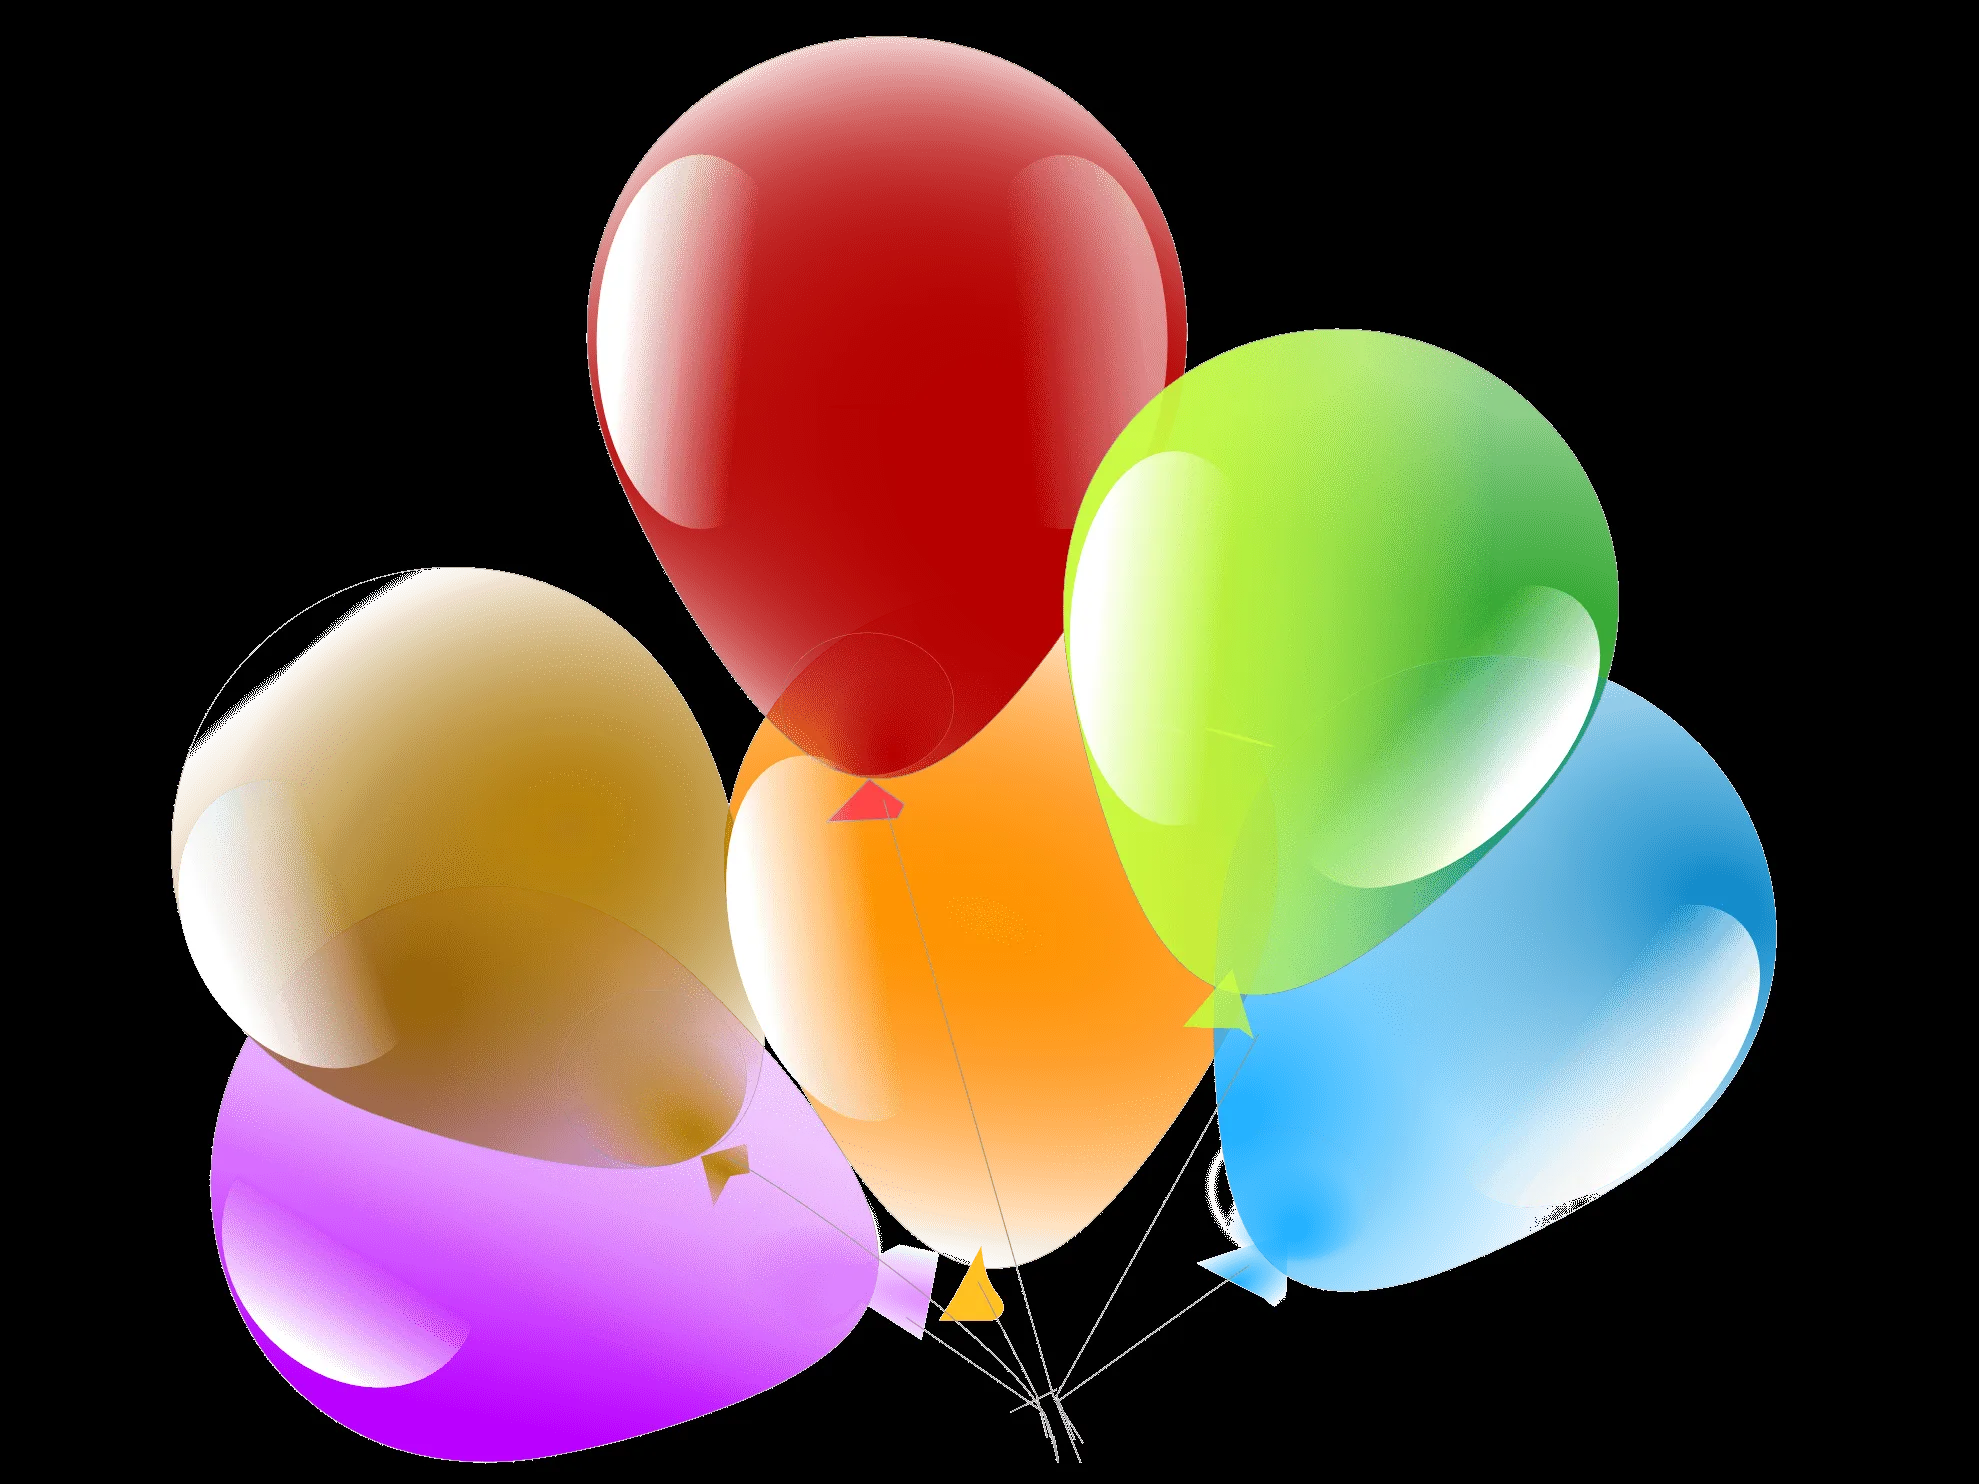 Balloons Png - ClipArt Best